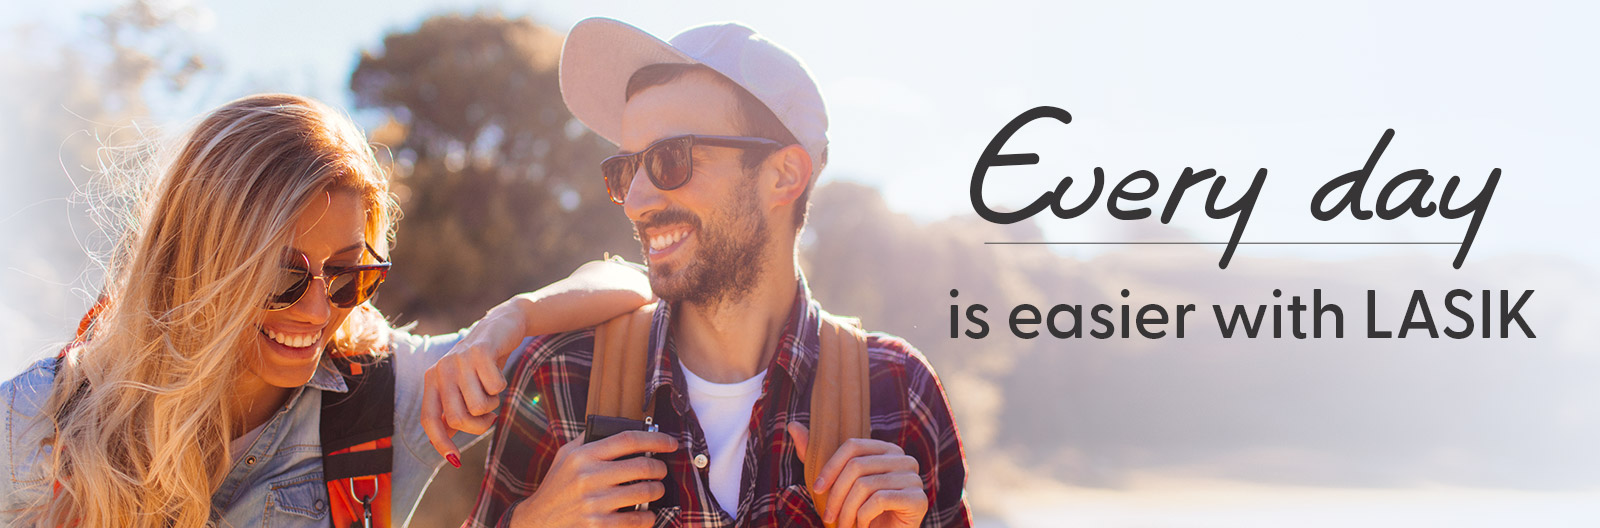 LASIK MD - Every day is easier with LASIK